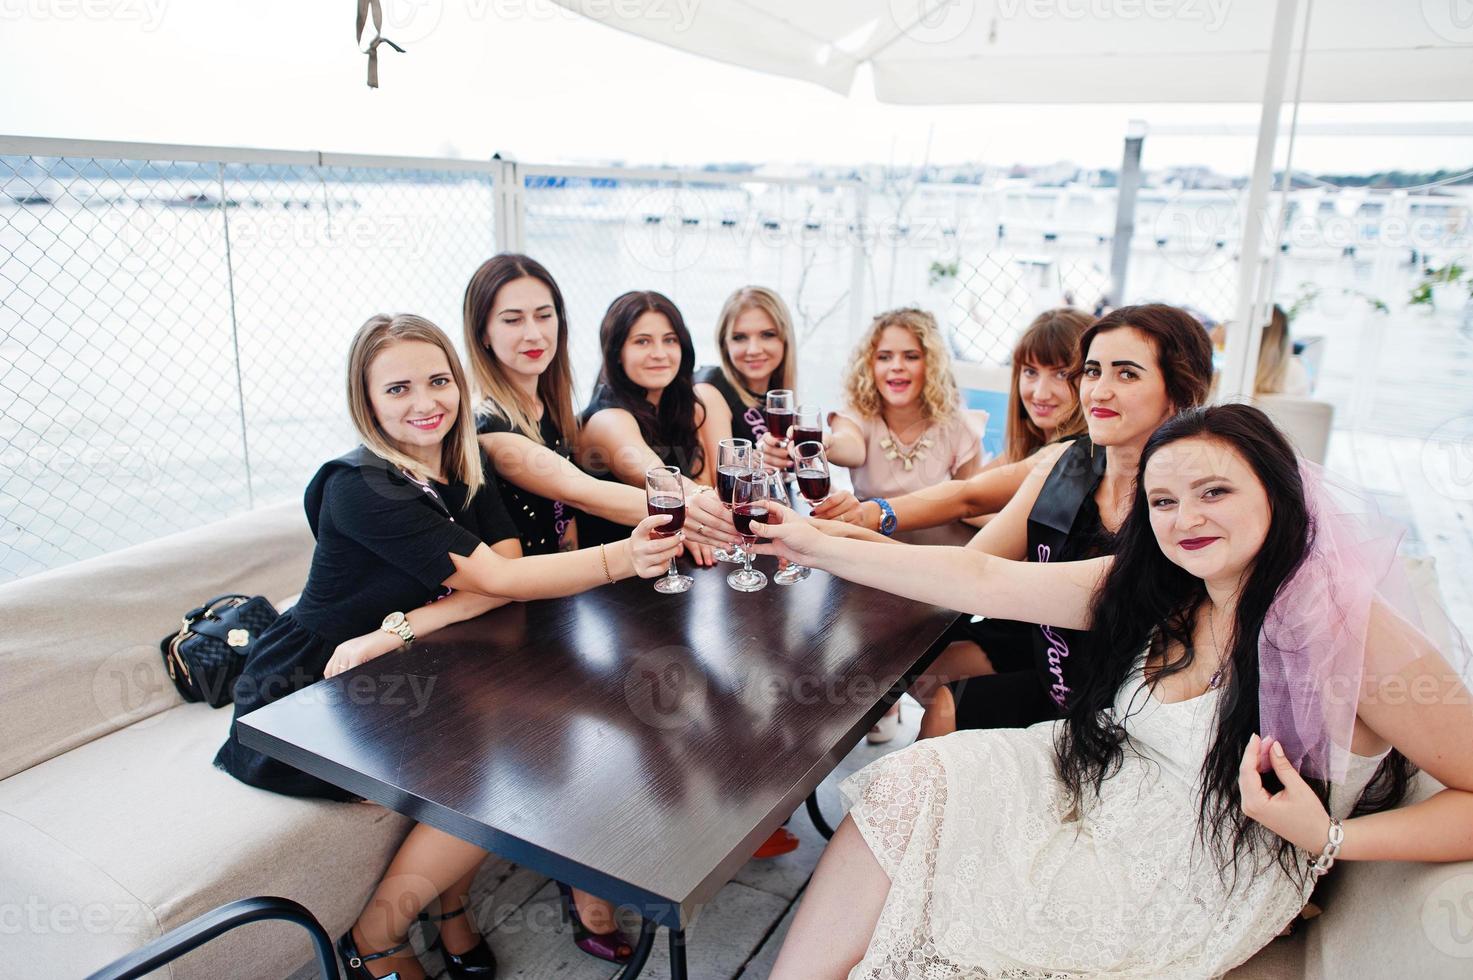 Group of 8 girls wear on black and 2 brides at hen party sitting at table and drinking rose champagne from glasses. photo